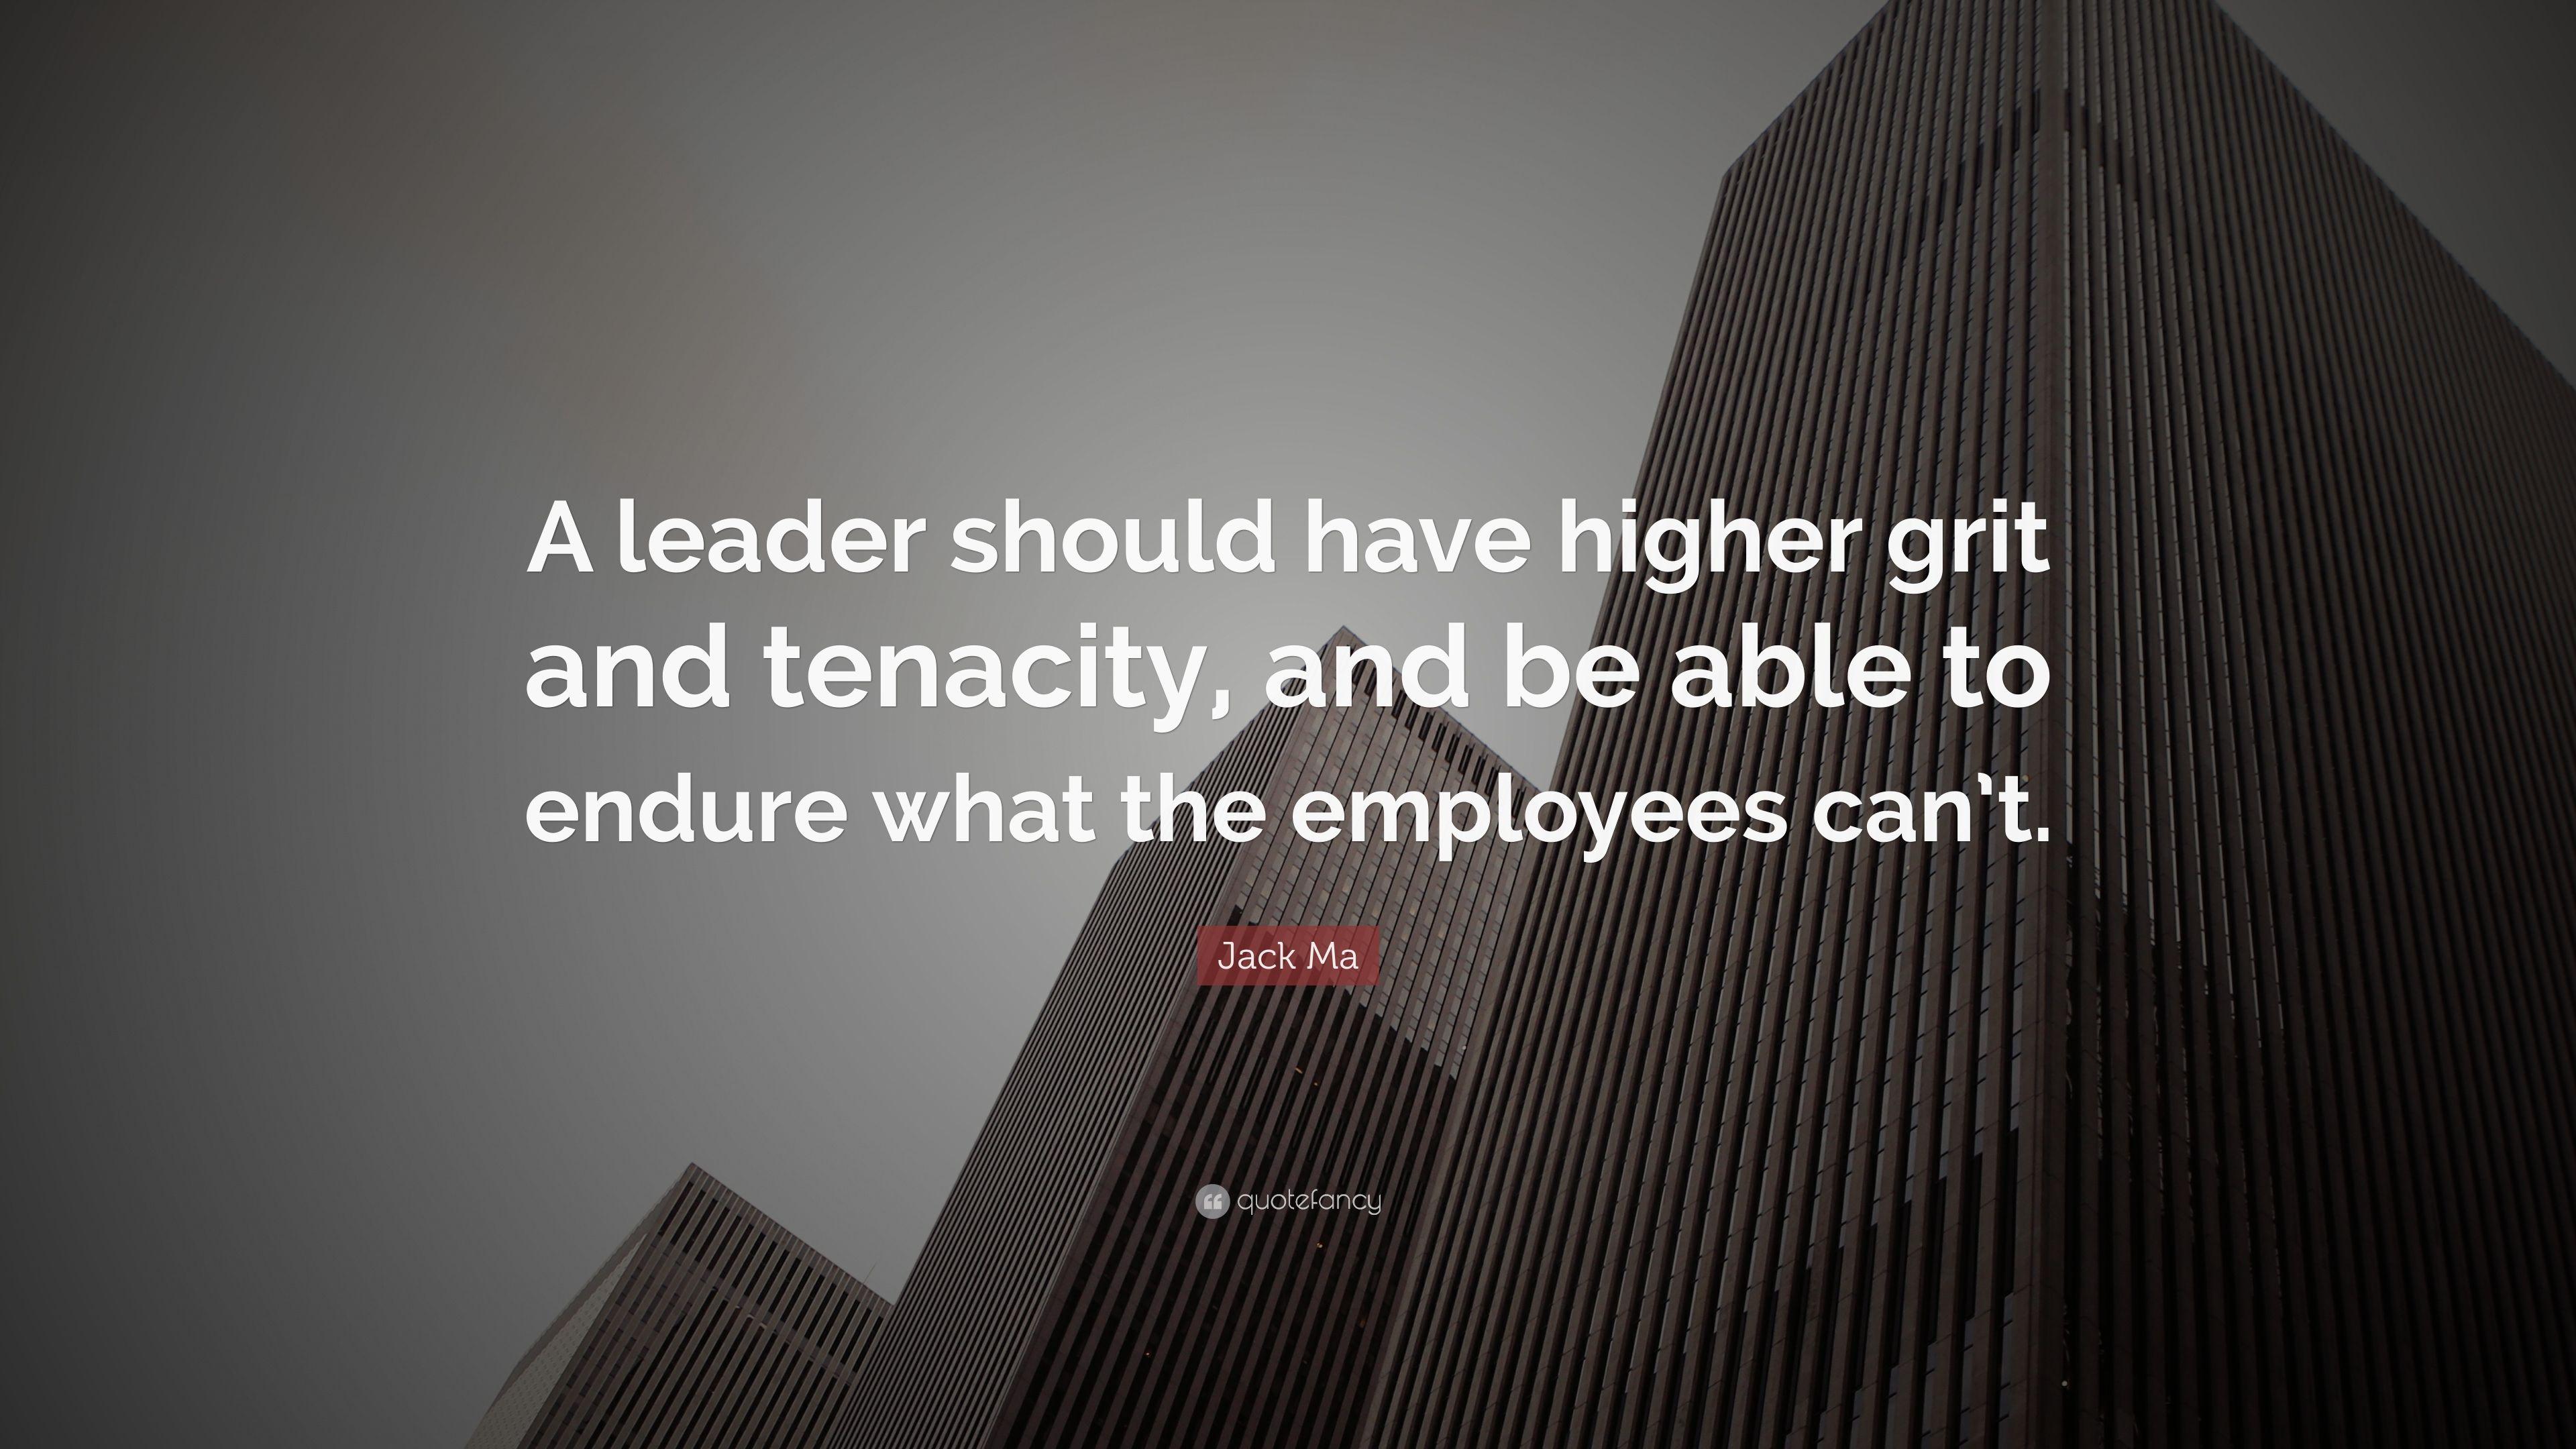 Jack Ma Quote: “A leader should have higher grit and tenacity